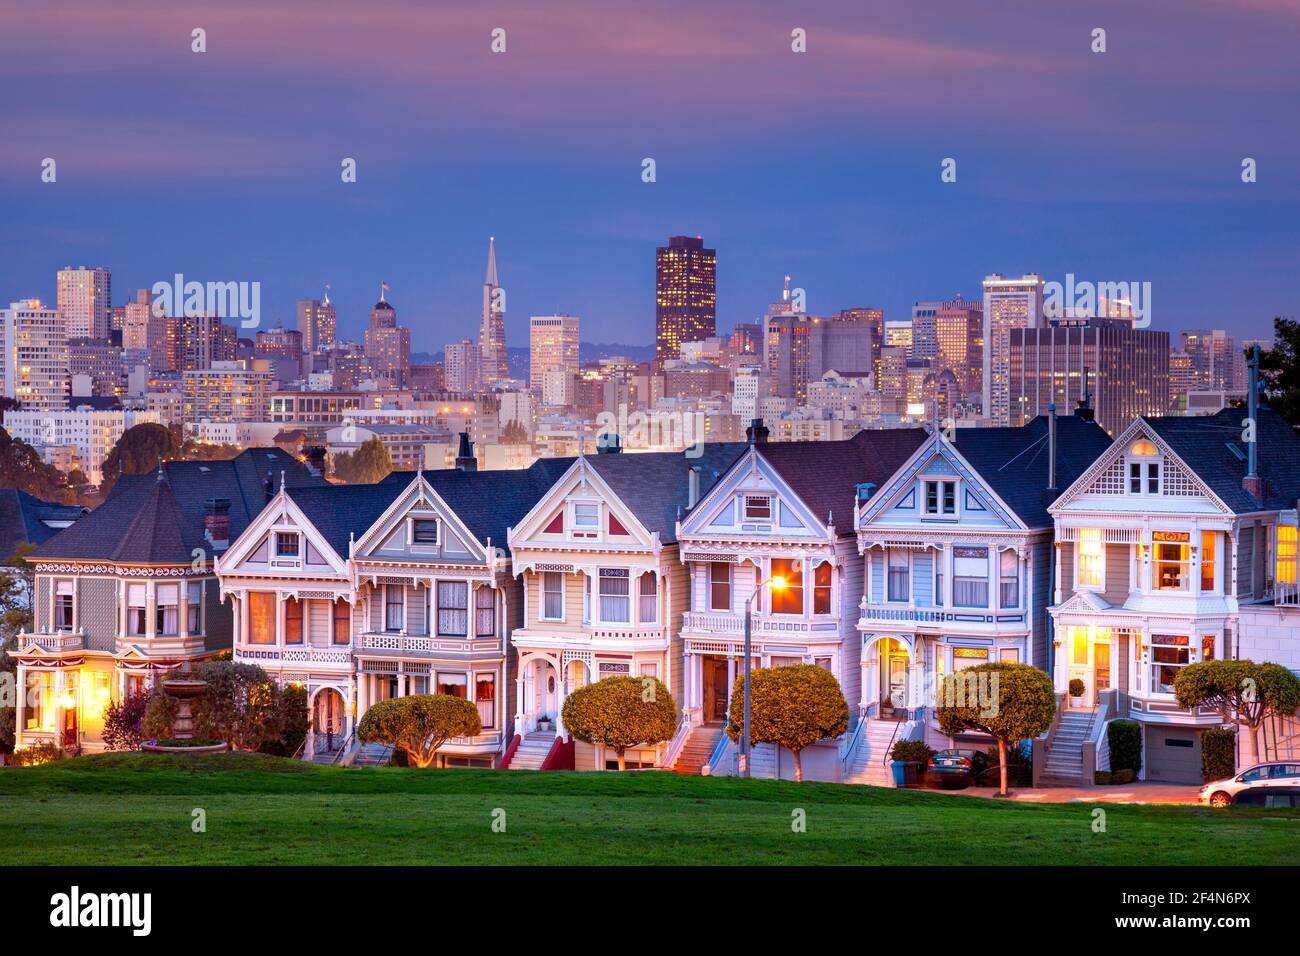 Twilight at the Painted Ladies overlooking the skyline of San Francisco, California, USA Stock Photo